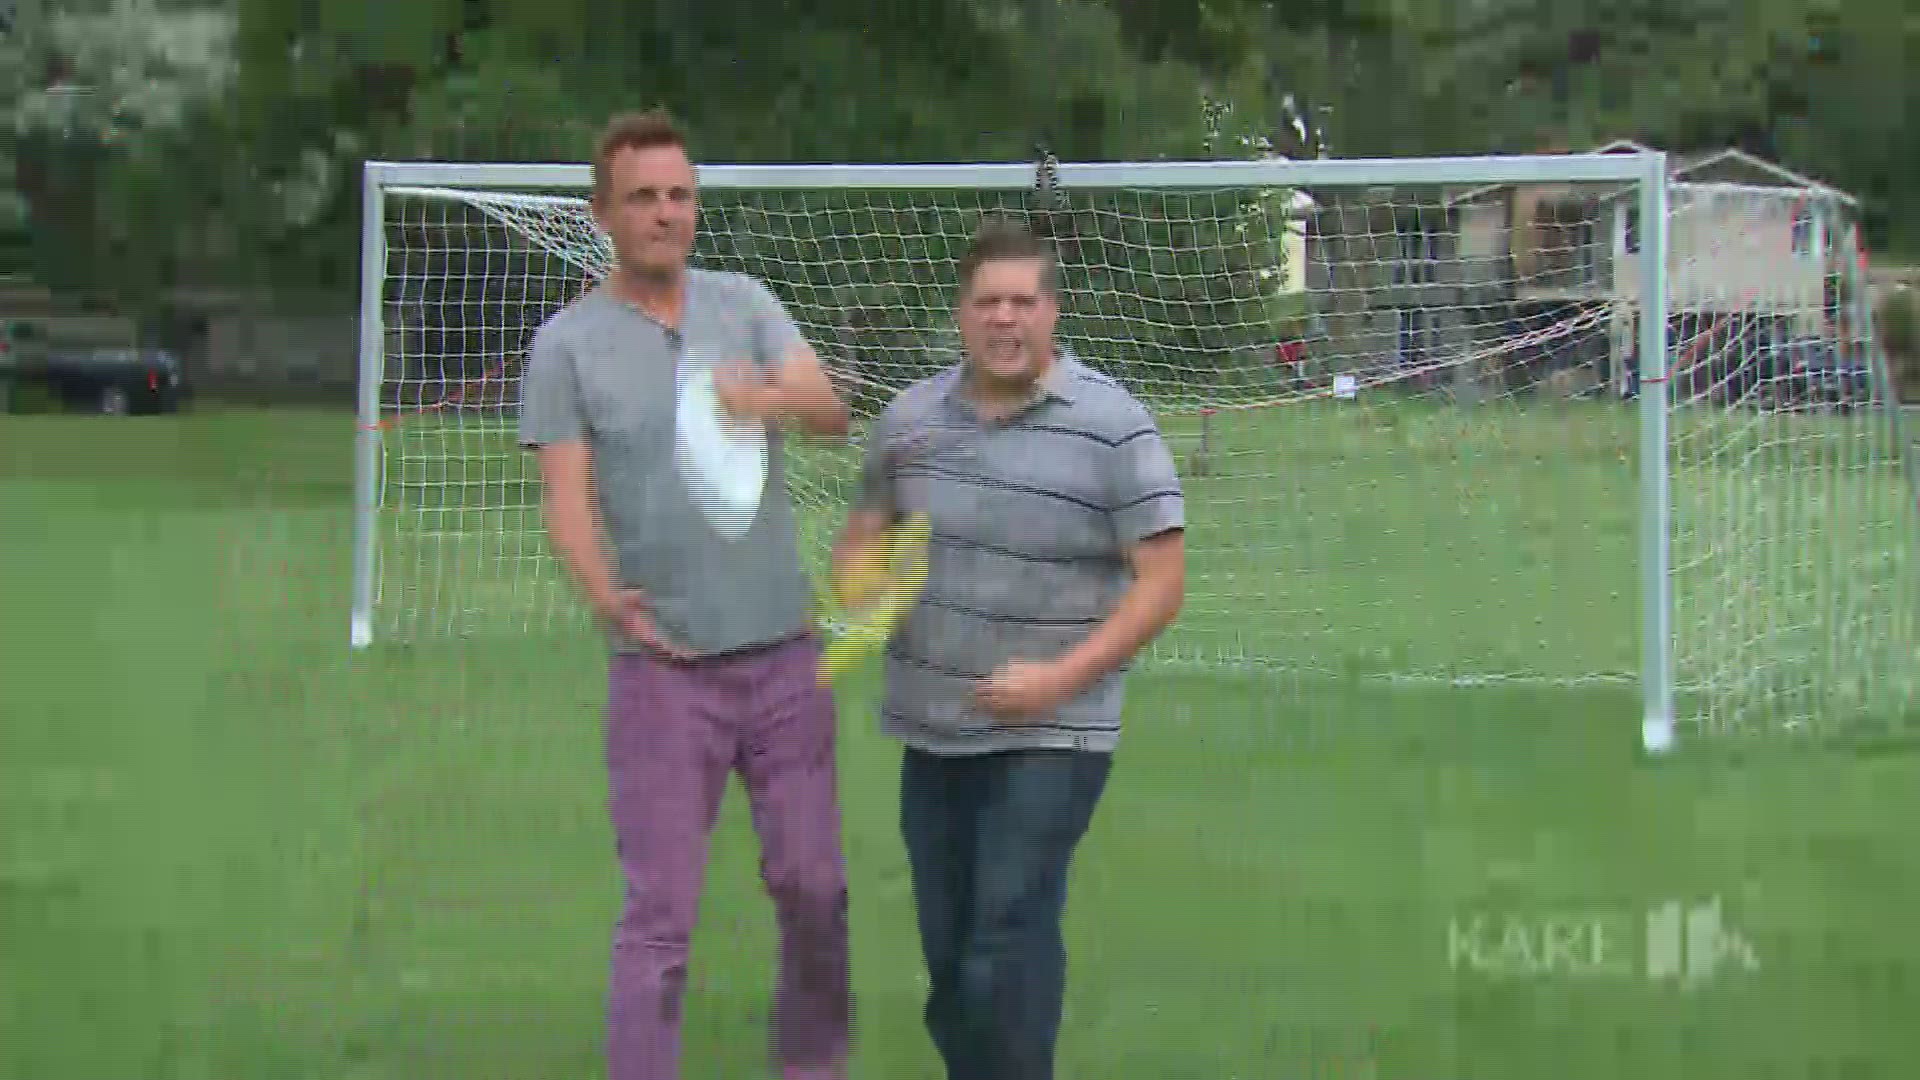 It's easy to toss a frisbee right? The real test for Eric Perkins and Ryan Shaver involved trying to make a trick while throwing a disc into a soccer net! https://kare11.tv/2KUgoS7